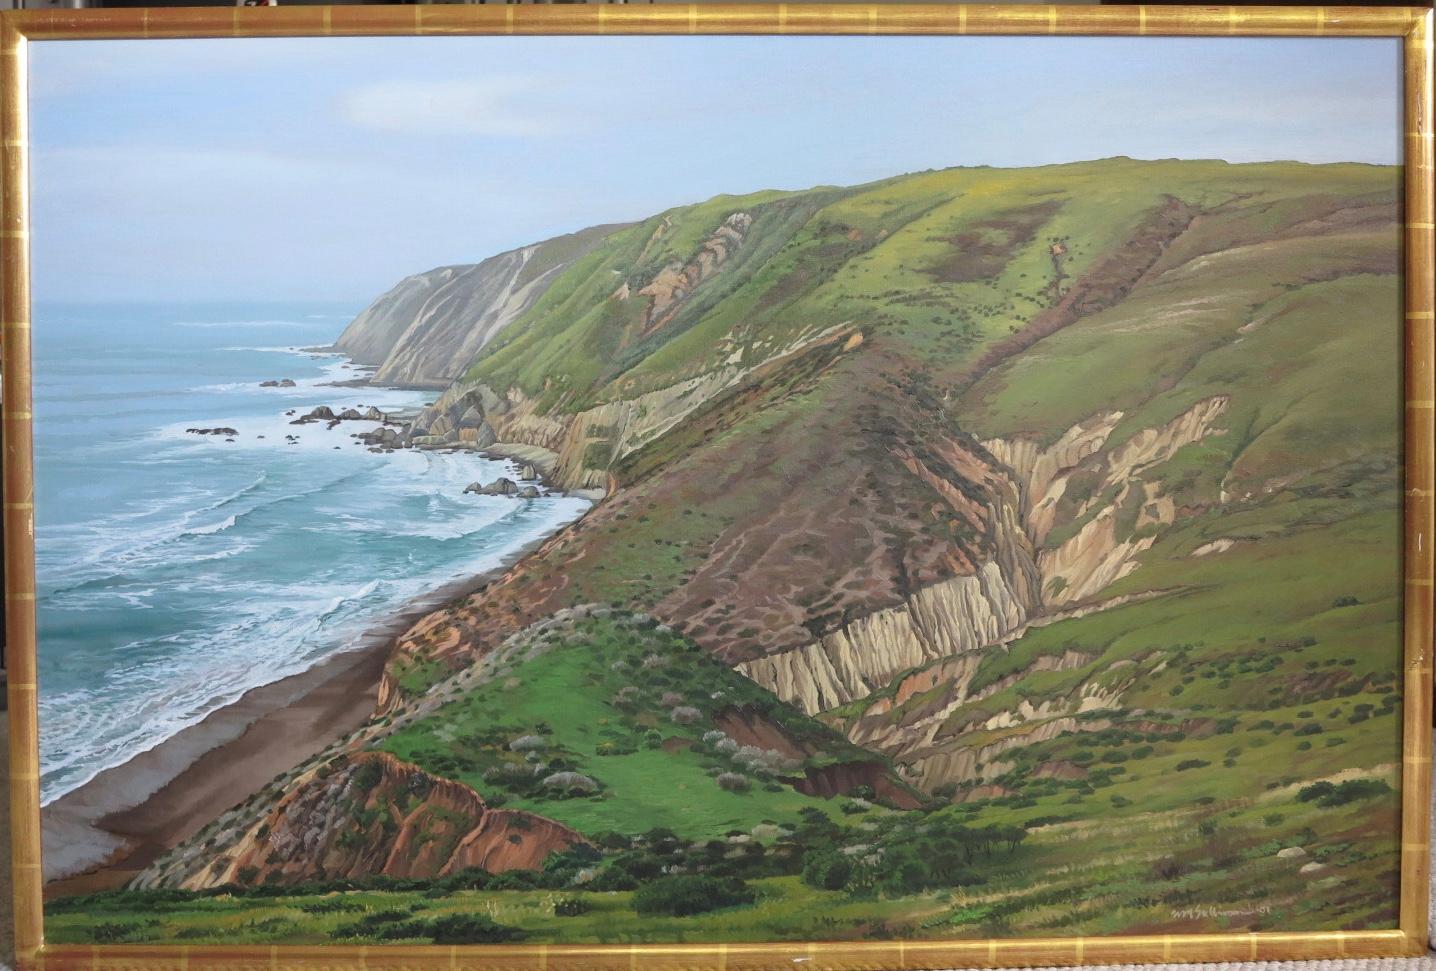 Tomales Point, Point Reyes CA (California coastal landscape painting) - Painting by William M. Sullivan